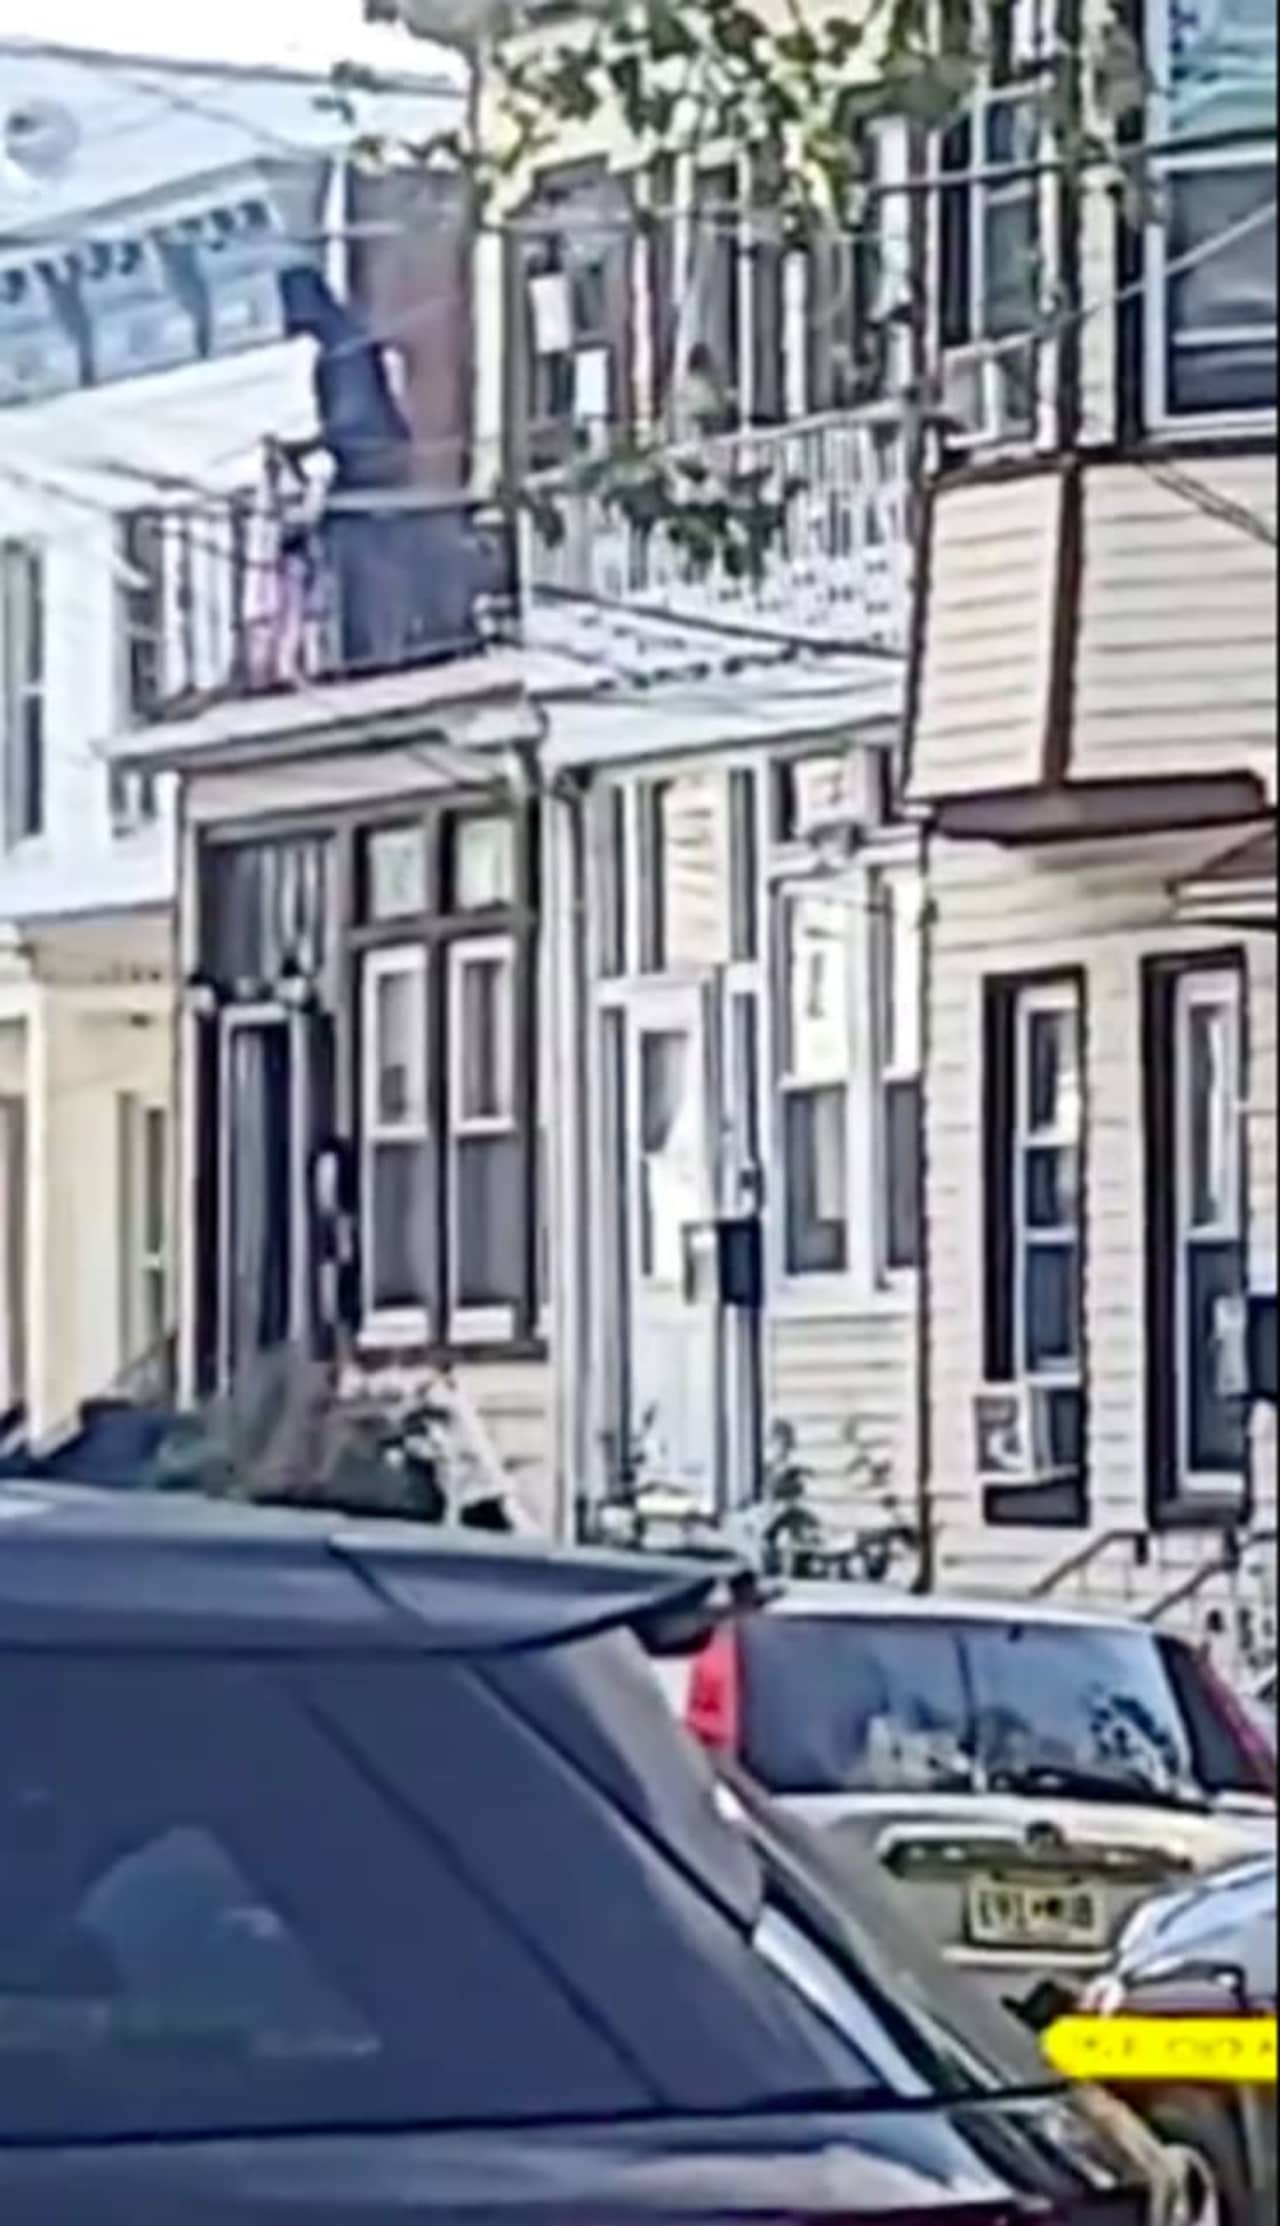 “Don’t do it brother,” says a man capturing the disturbing incident Saturday morning at the Jersey City home.